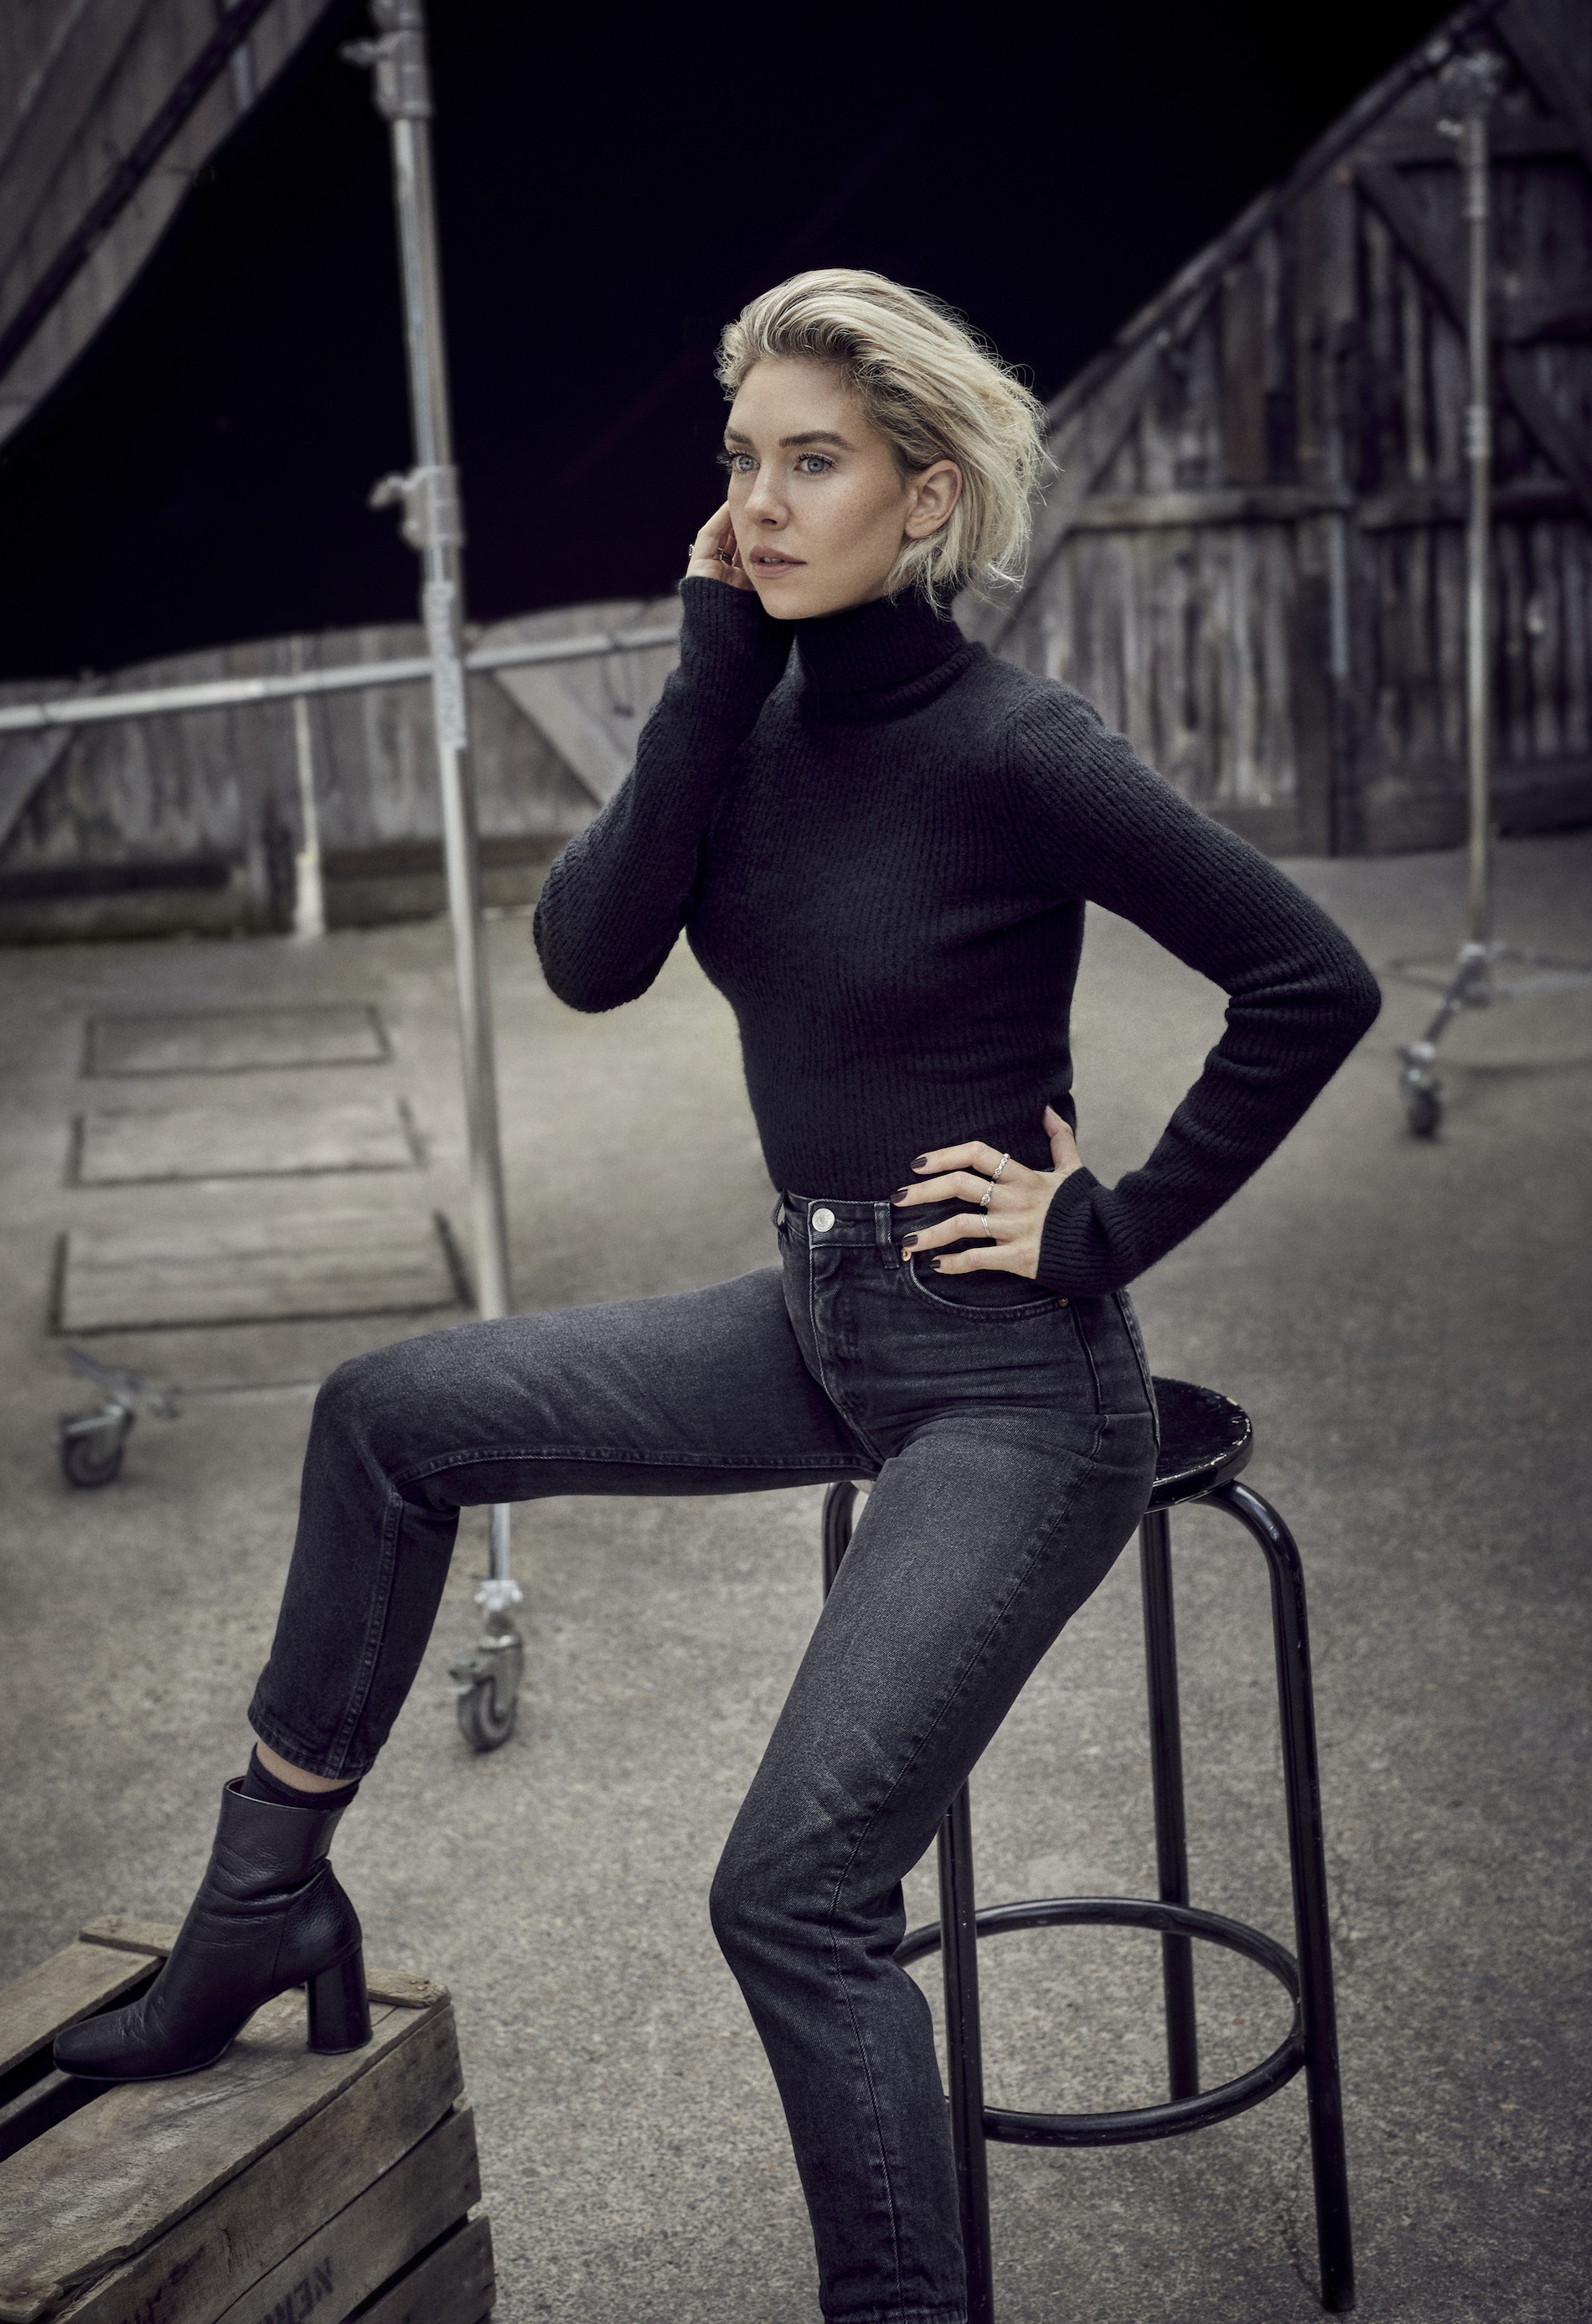 Vanessa Kirby on 'Pieces of a Woman' and Facing Fears